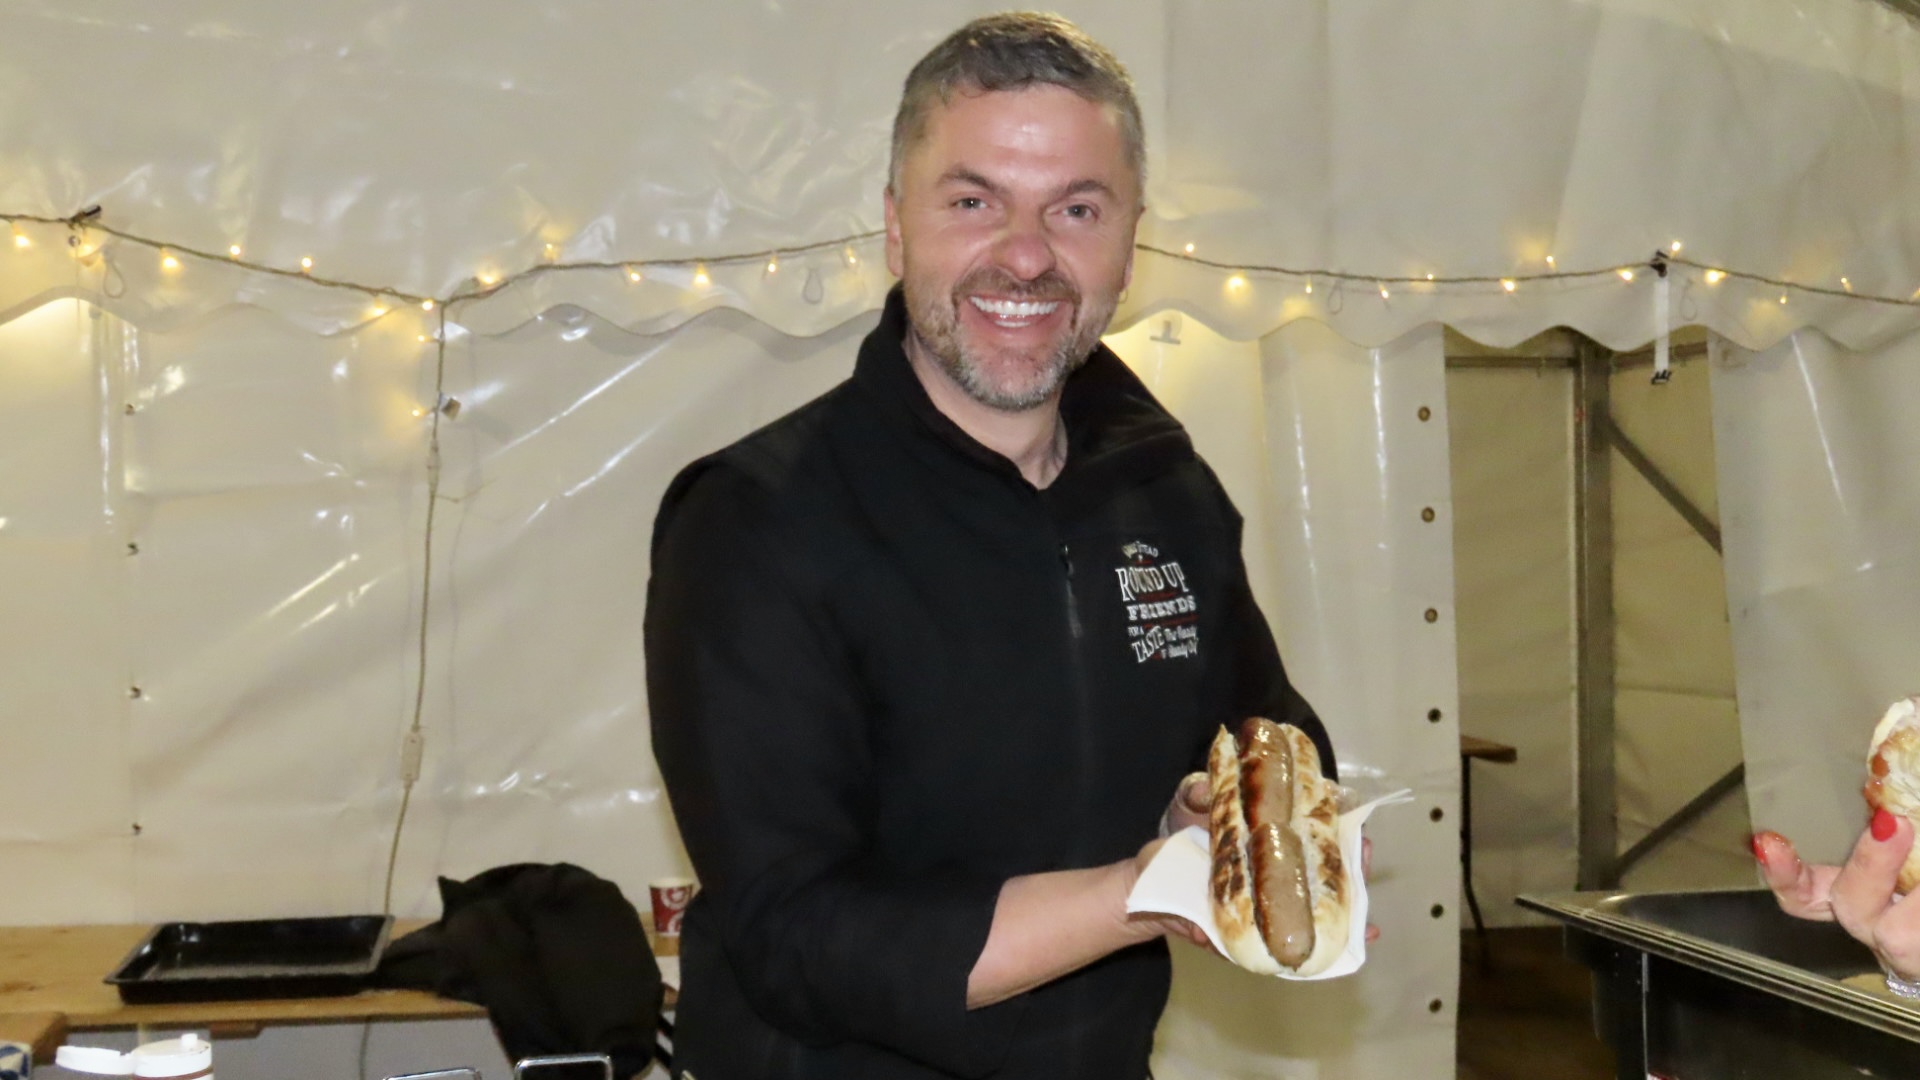 An ice skating rink, run by Ice Skating Southport, has opened at Victoria Park in Southport. Top Southport chef Chris Stead is providing the food. Photo by Andrew Brown Media